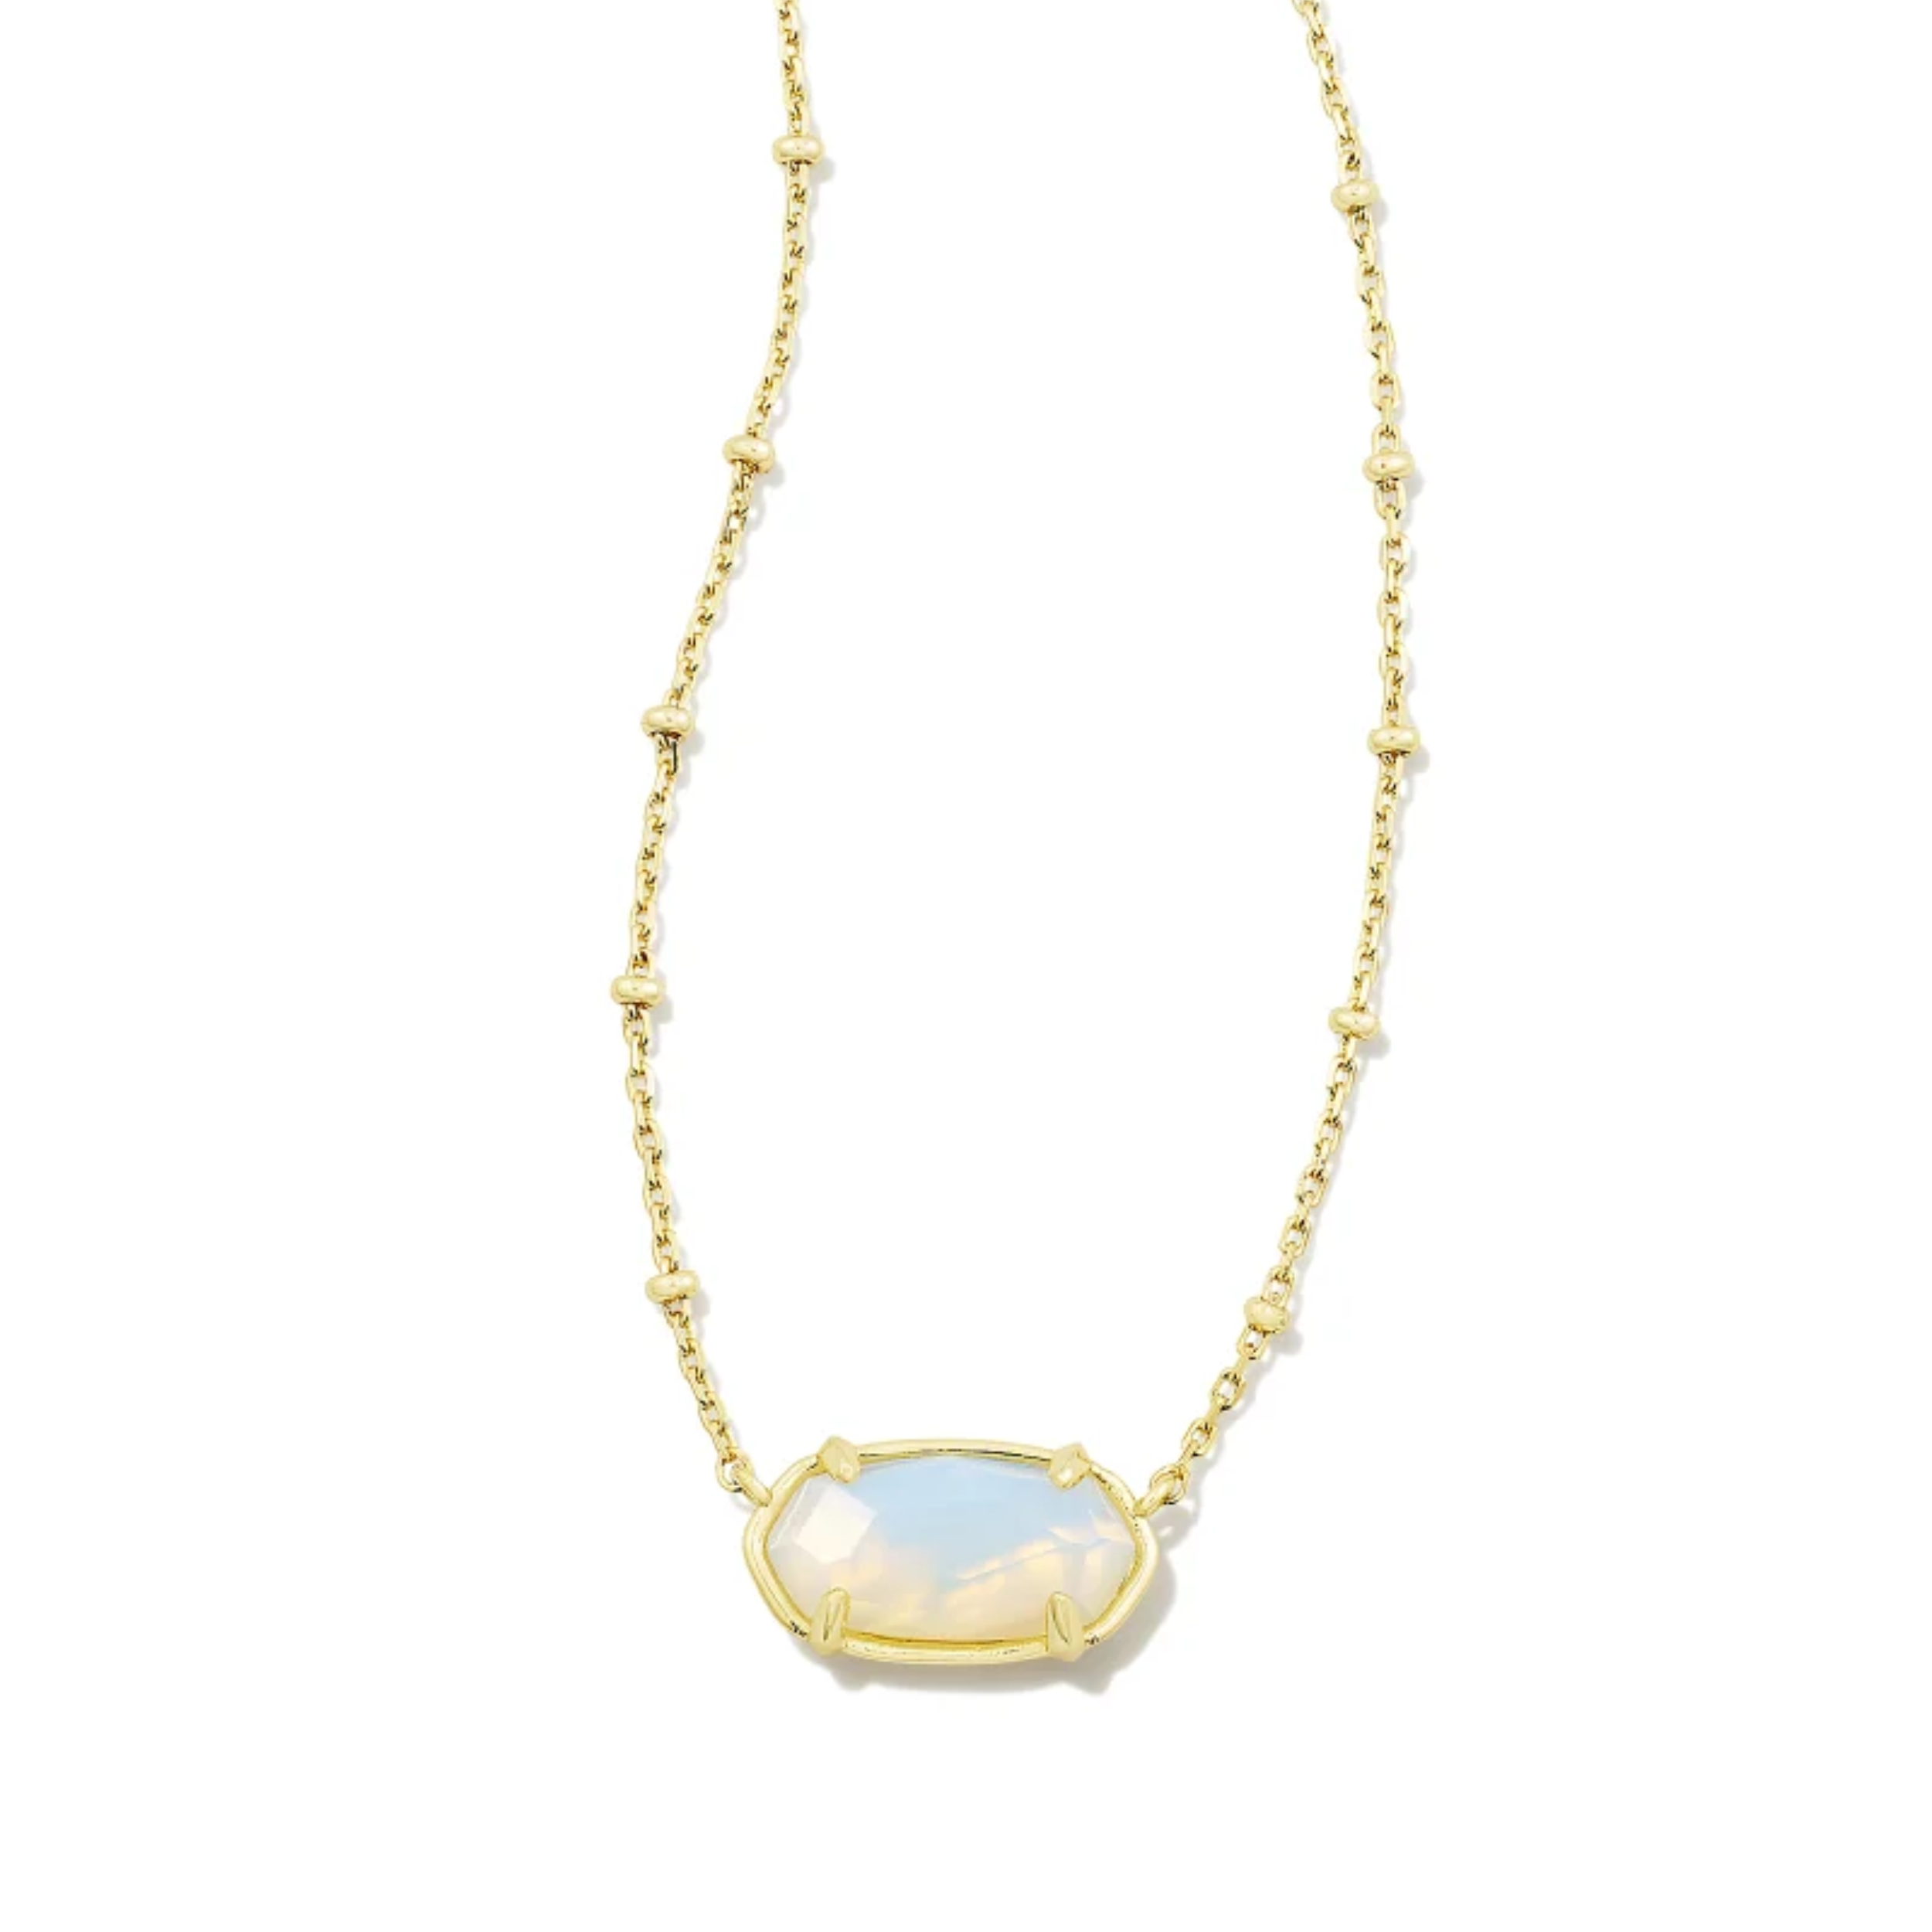 This Faceted Elisa Gold Pendent Necklace in Iridescent Opalite illusion by Kendra Scott is pictured on a white background.